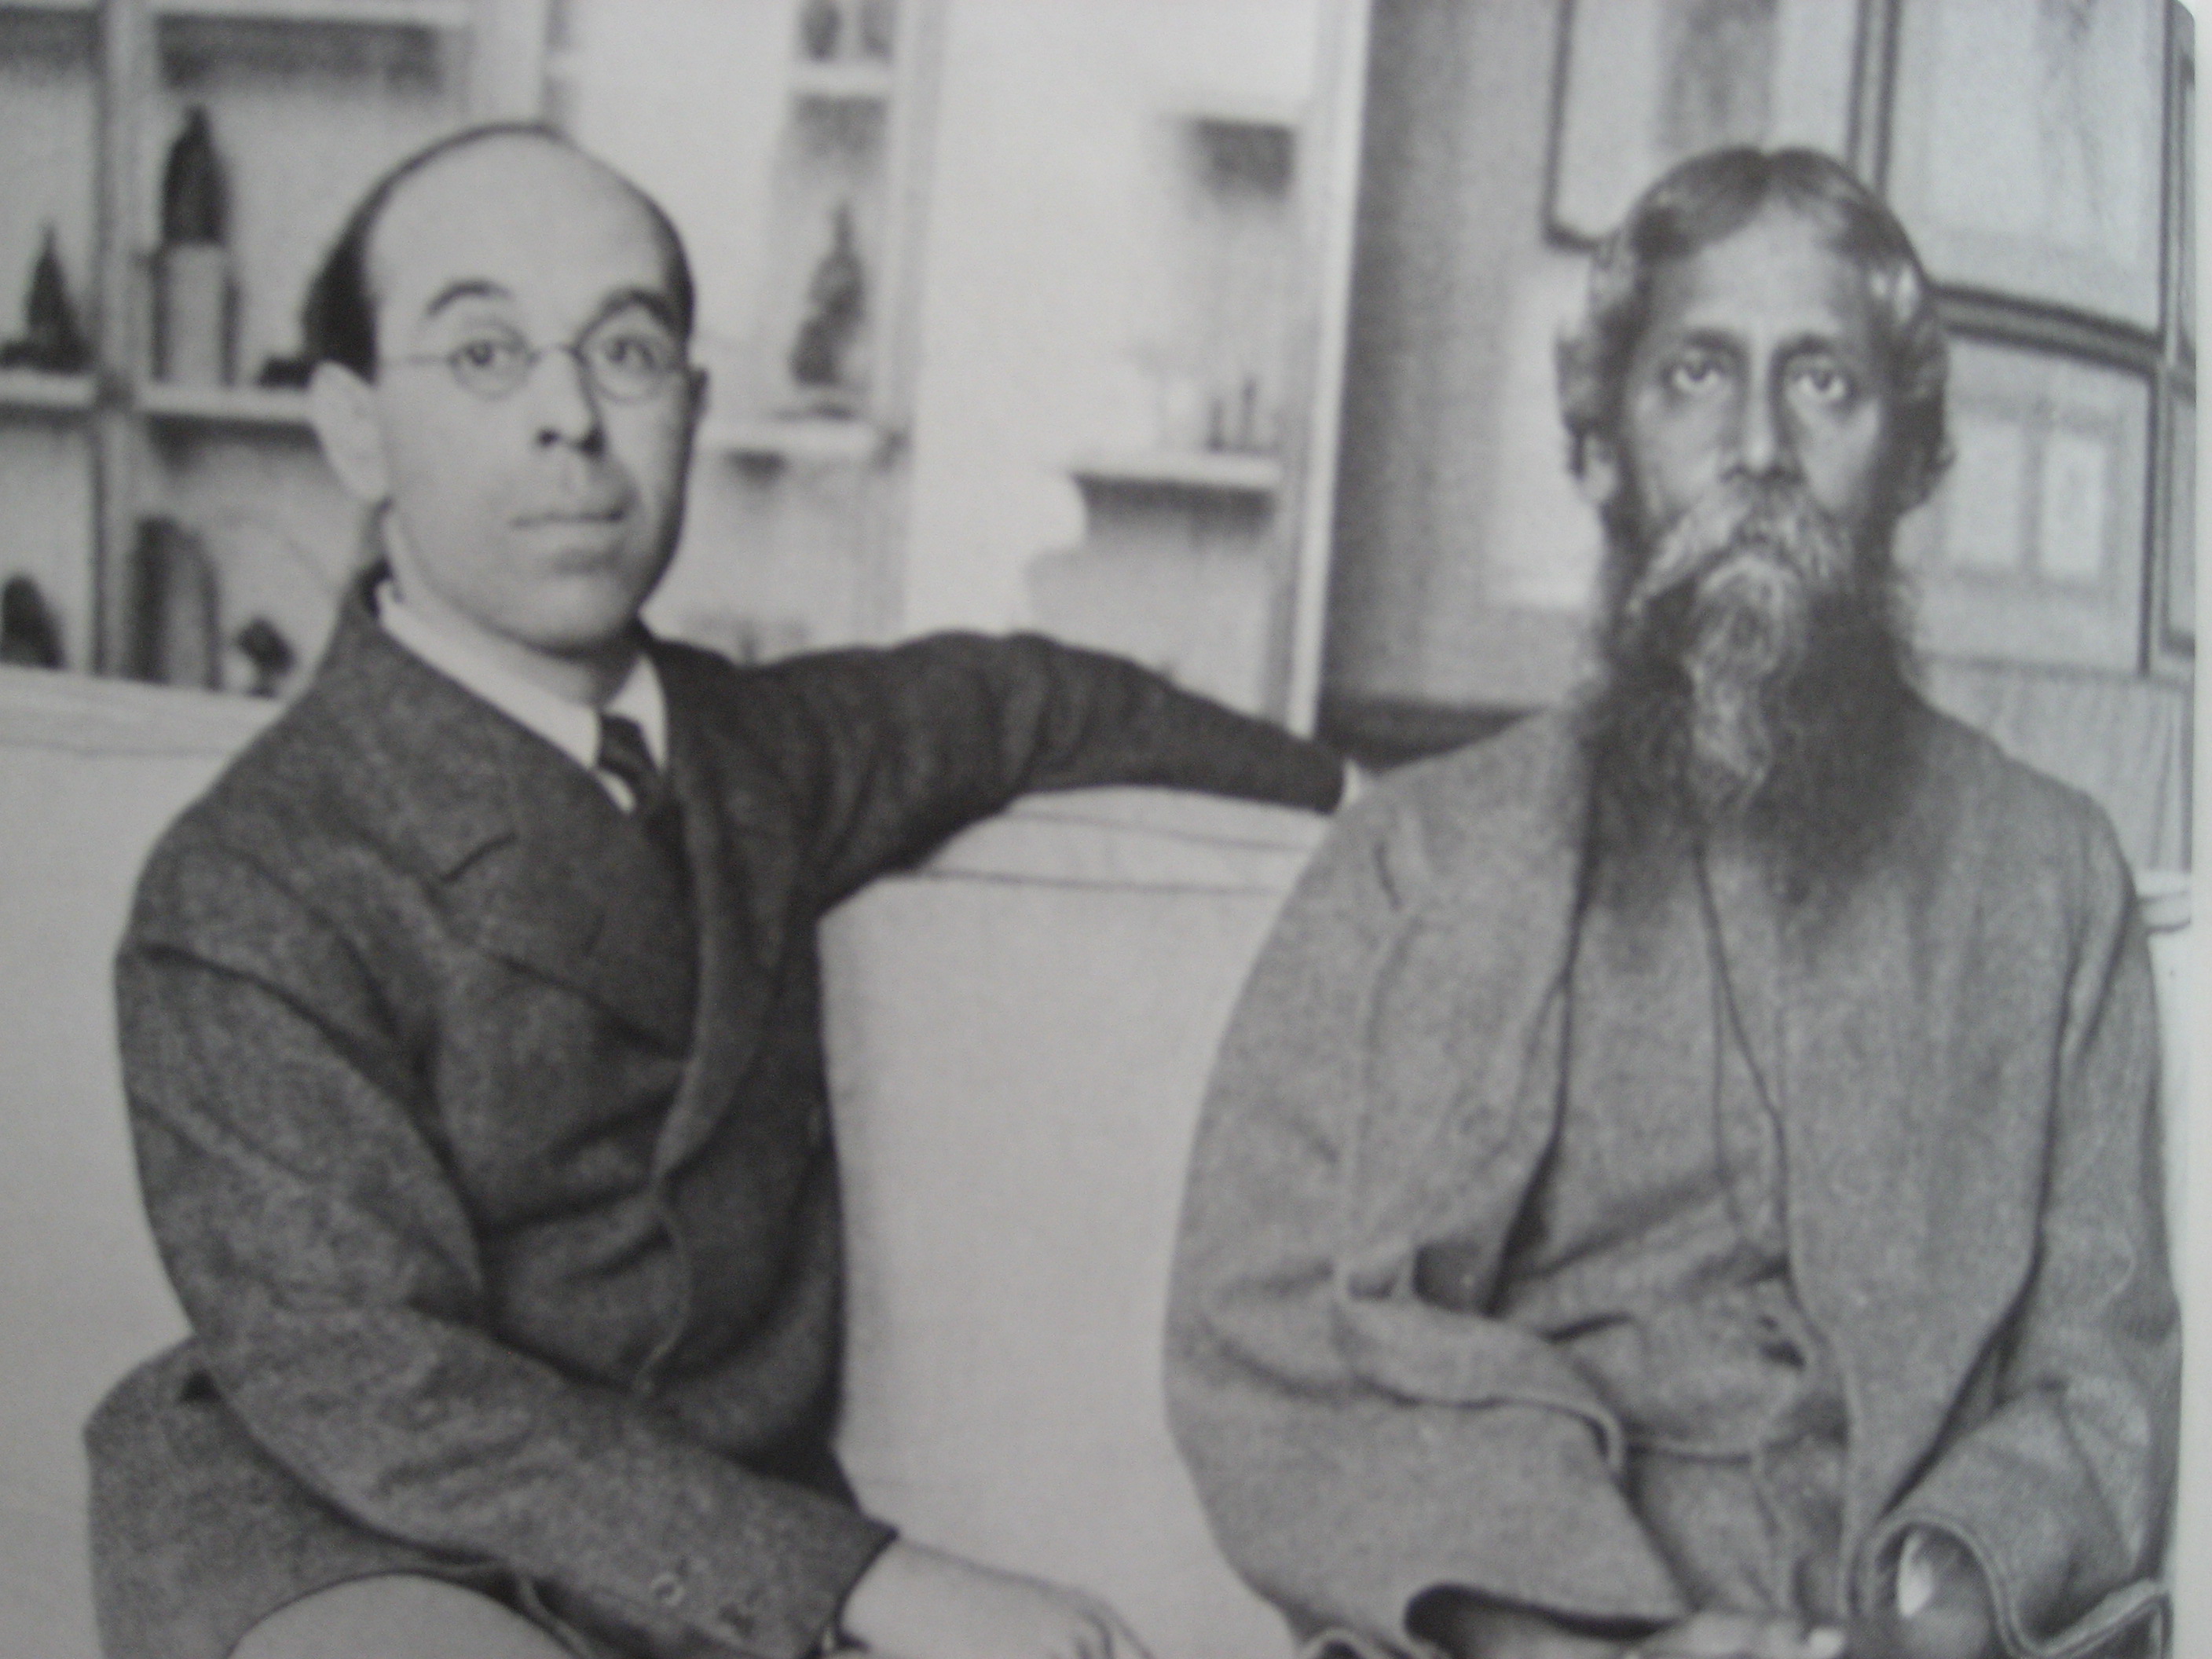 The Arts across continents: Tagore in London / Our Migration Story